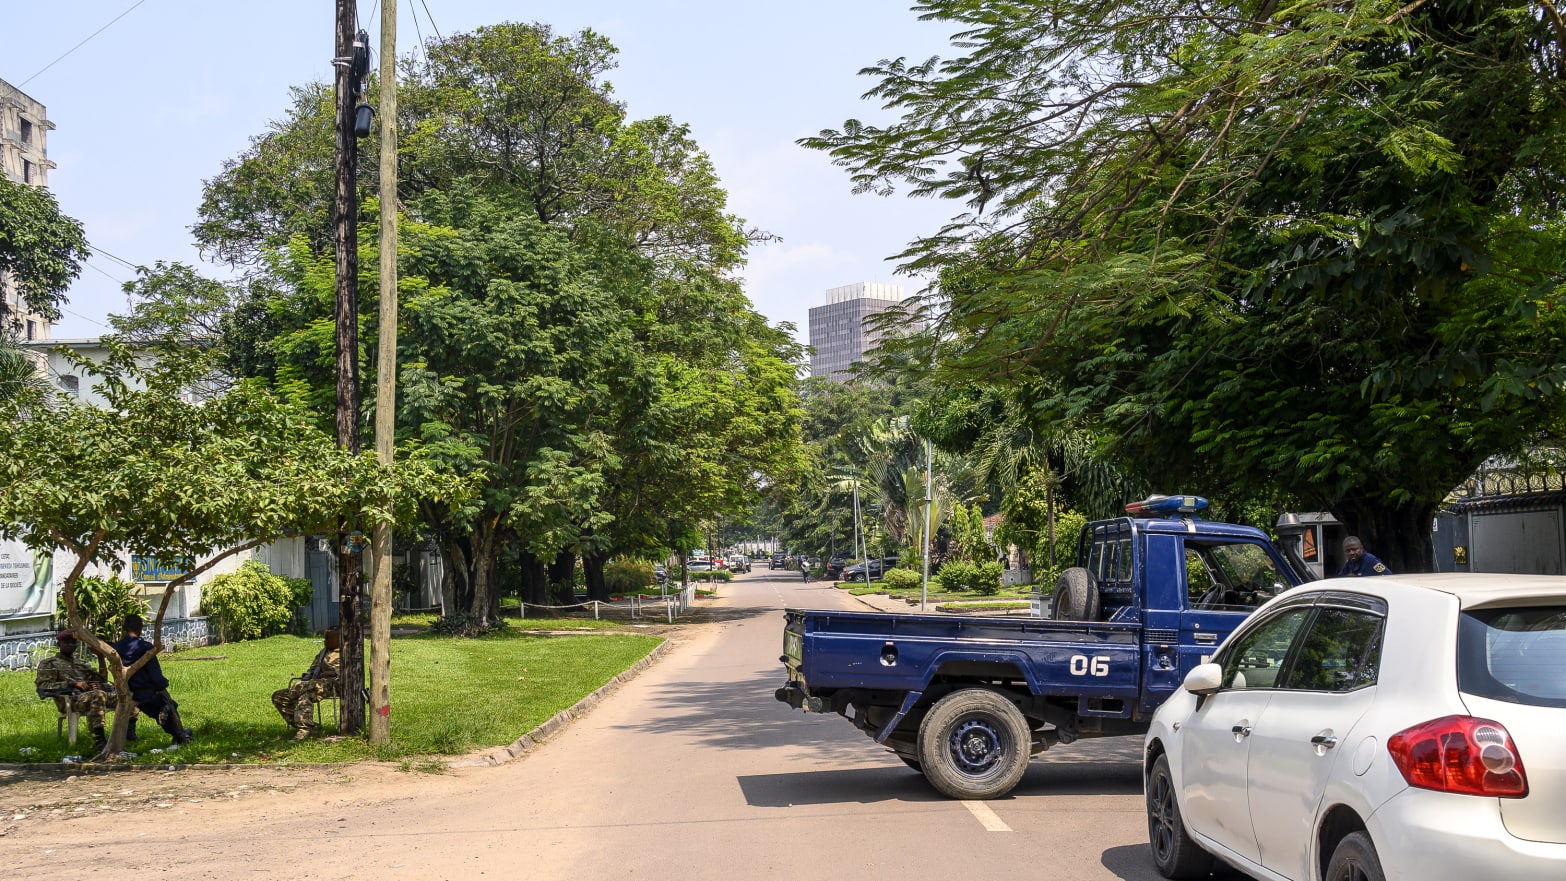 The Congolese Republican Guard and police block a road around the scene of an attempted Coup in Kinshasa.